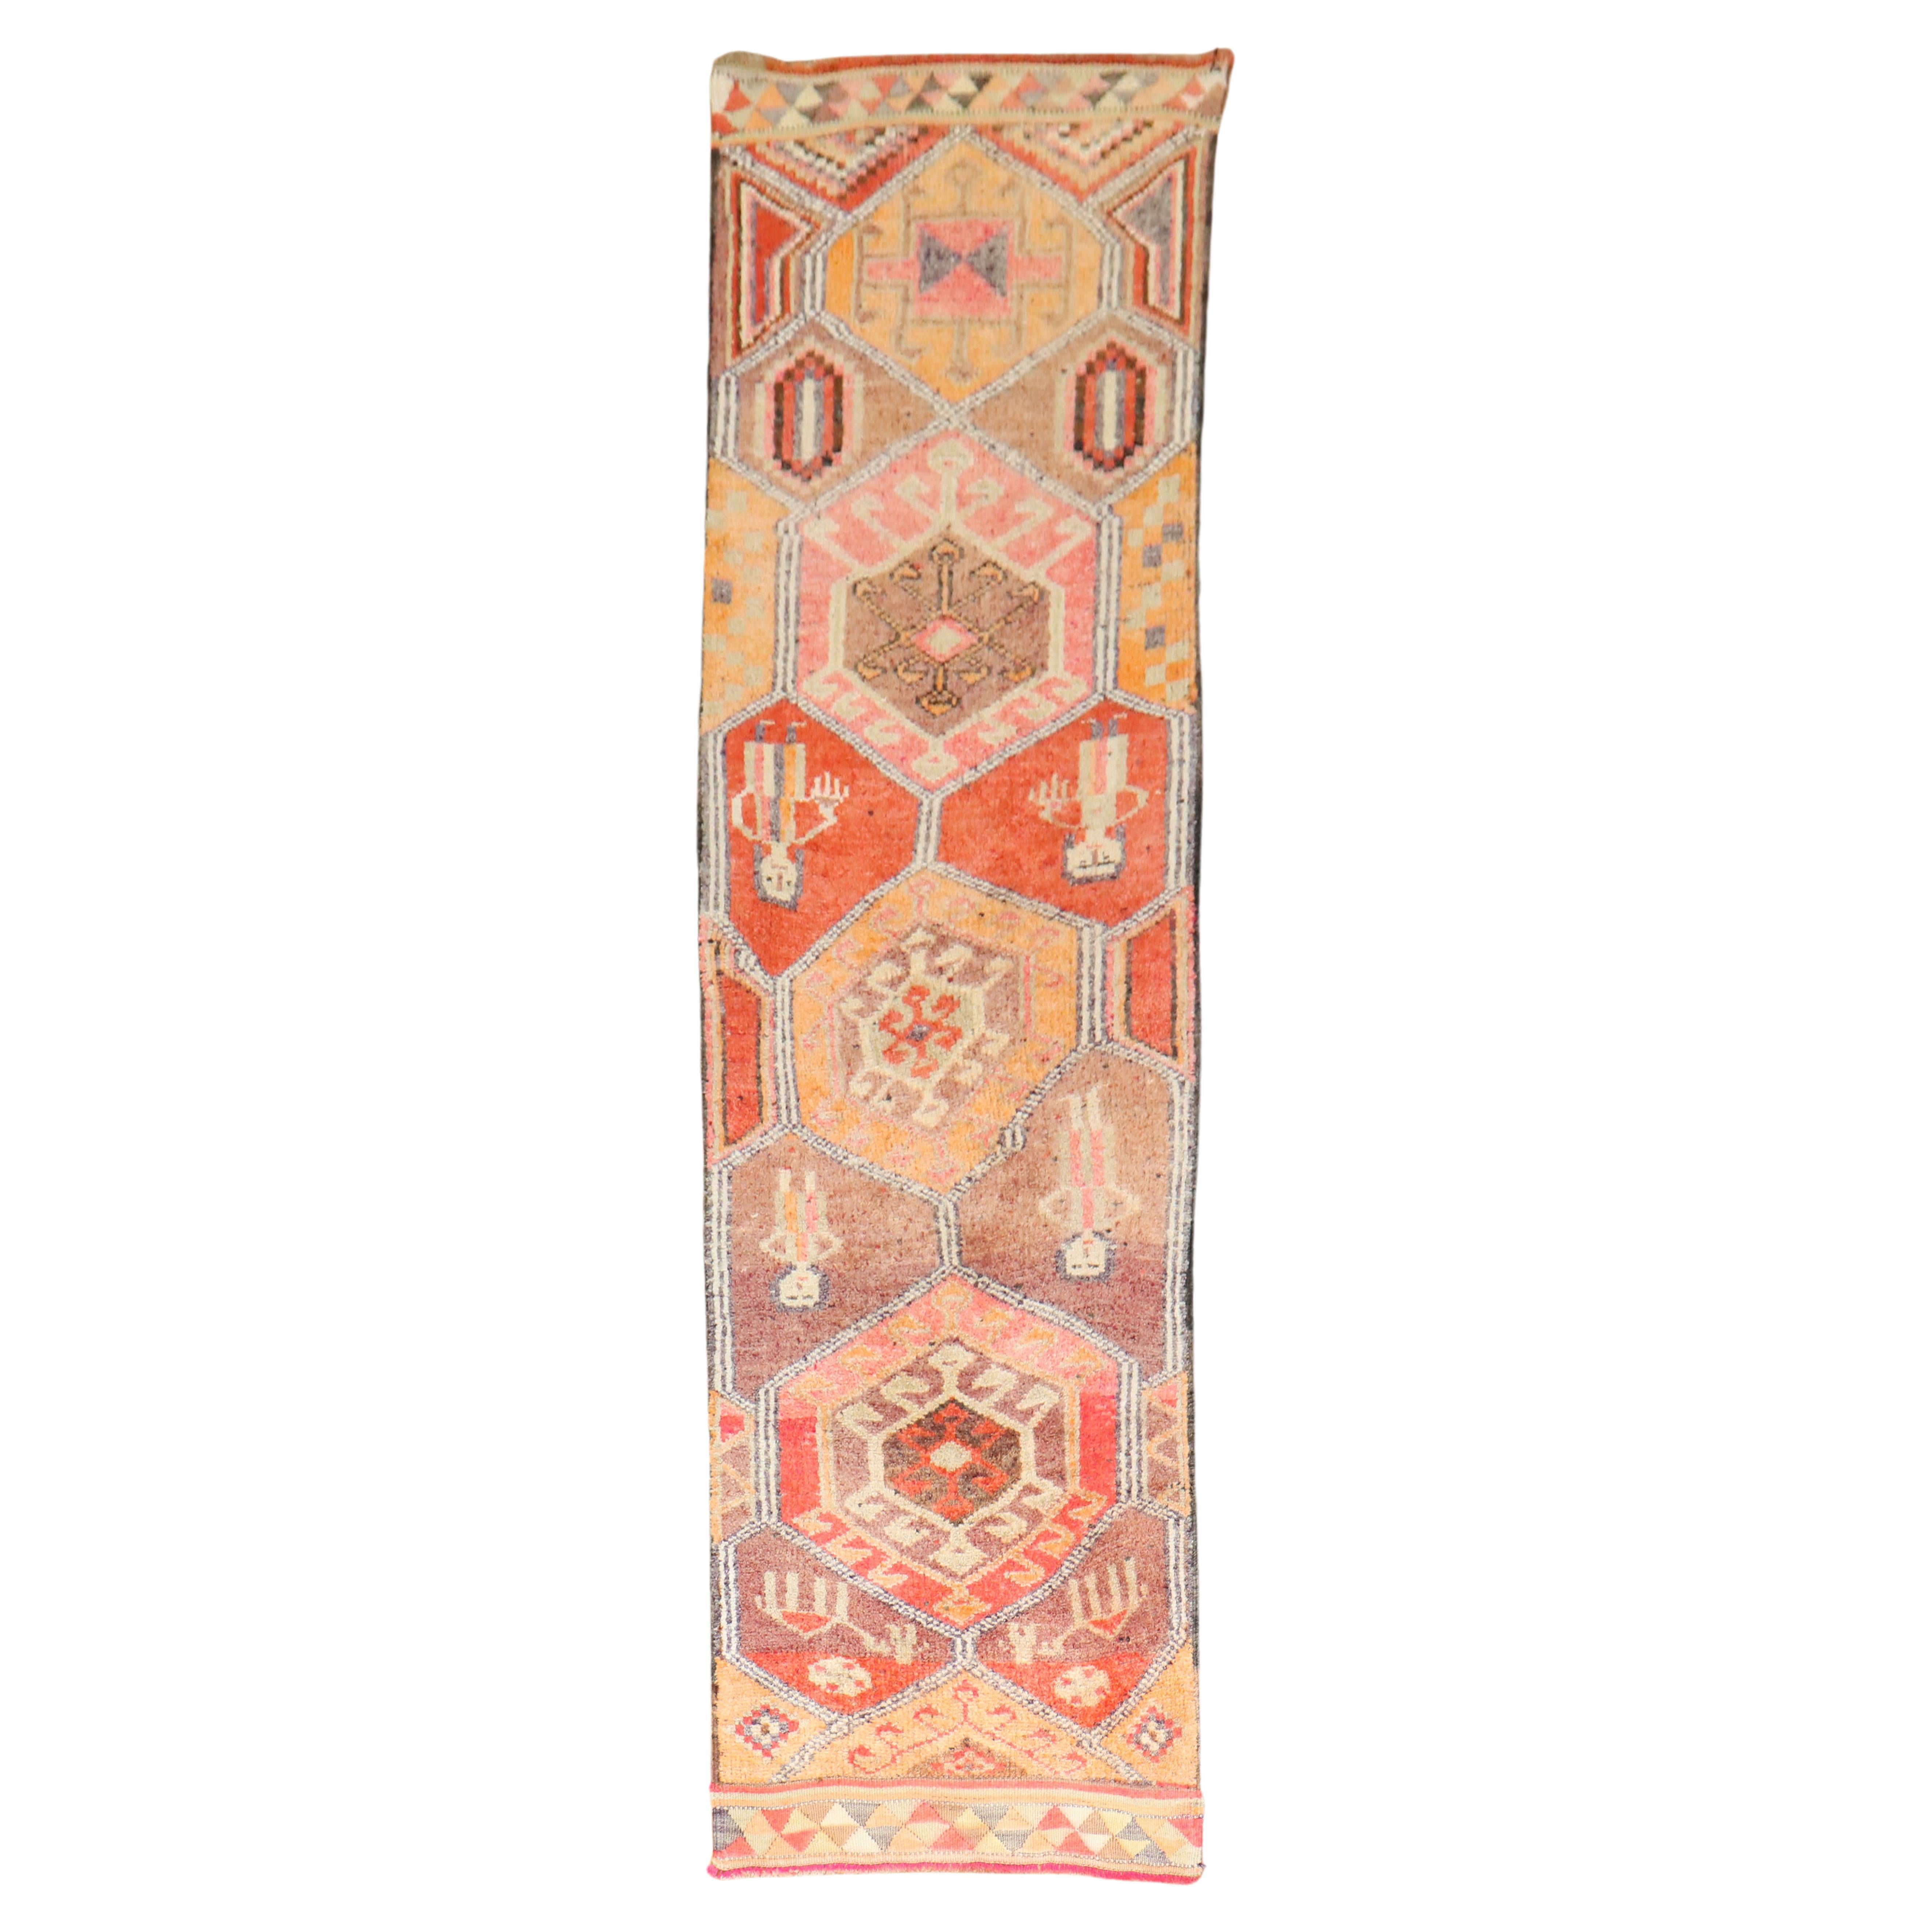 Mid 20th century Tribal Turkish Geometric runner featuring 2 men and 2 women on a geometric colorful motif

Measures: 2'10'' x 10'3''.